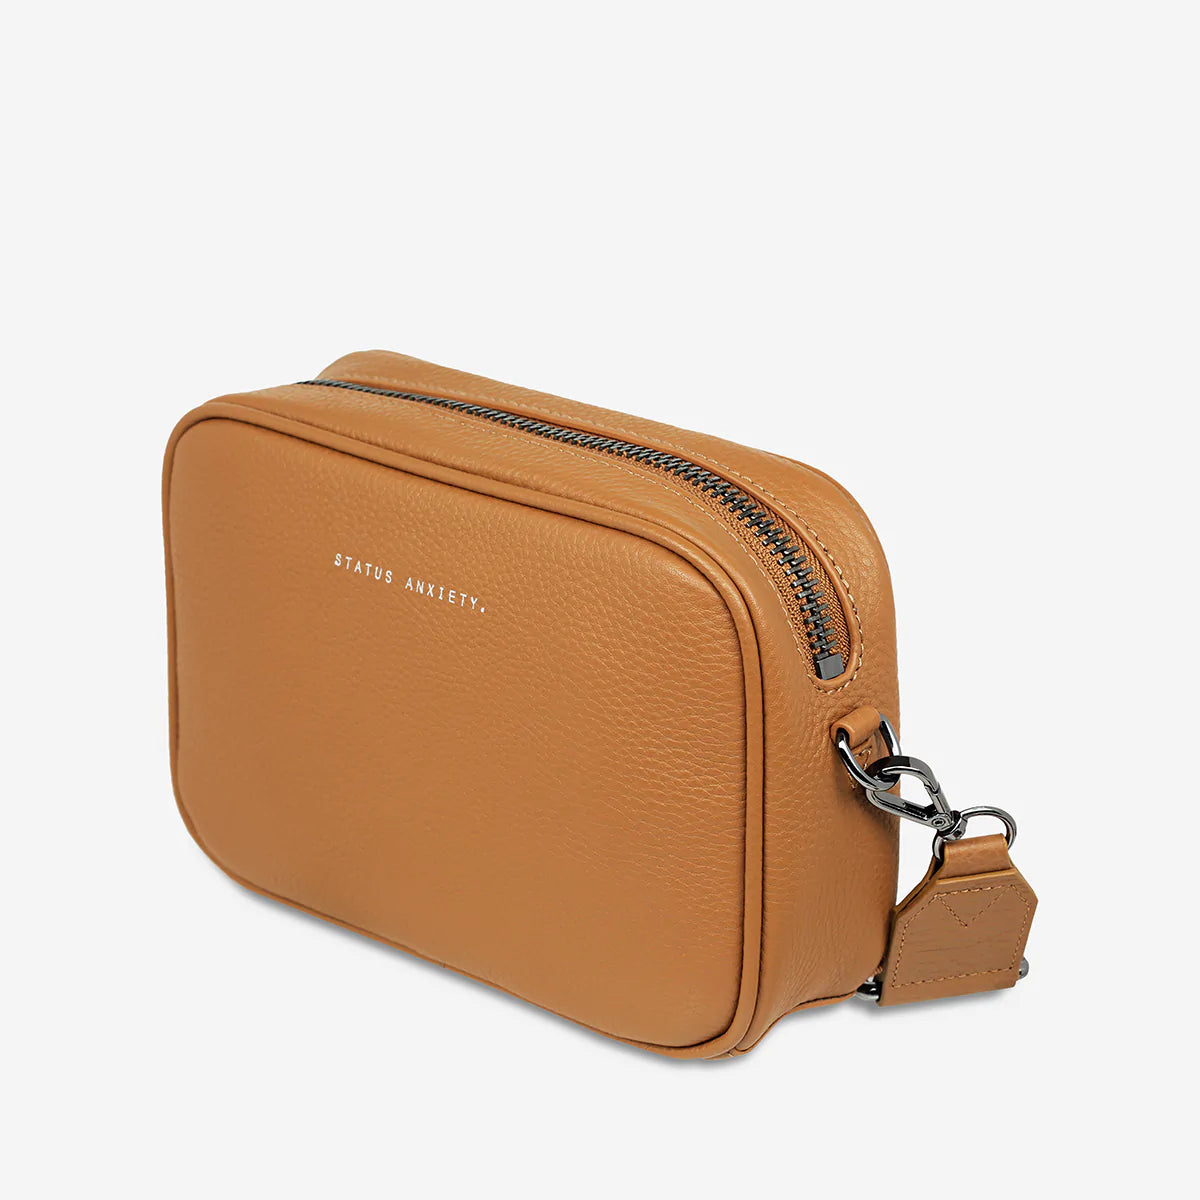 Status Anxiety Bag - Plunder with Webbed Strap in Tan